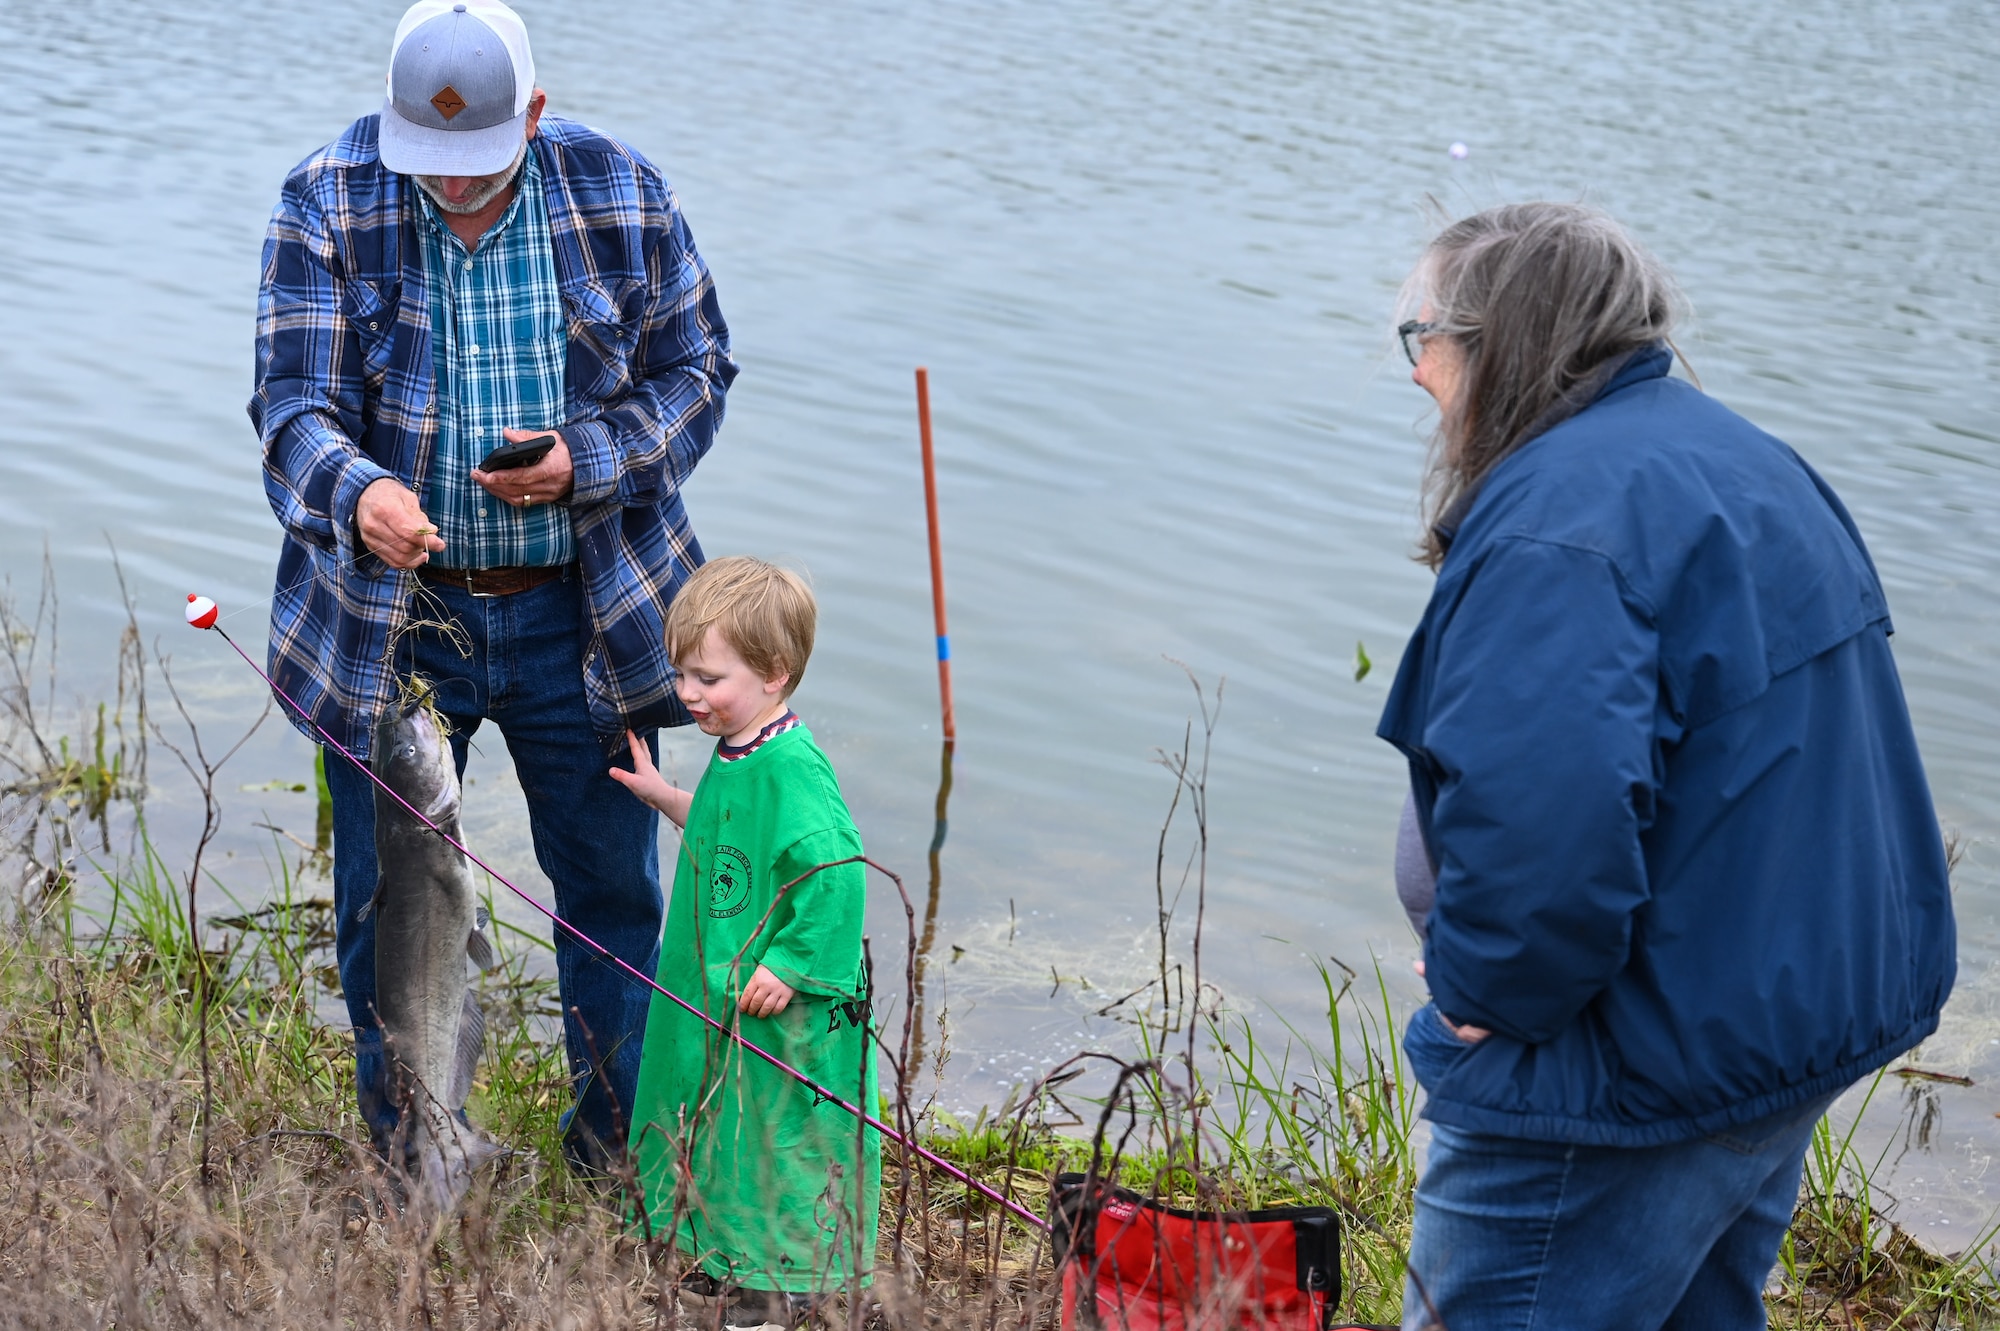 A child catches a fish with his grandparents at the 97th Civil Engineer Squadron environmental flight’s annual fishing derby at Altus Air Force Base, Oklahoma, April 28, 2023. The fishing derby encouraged Airmen and families to connect with nature and wildlife on base. (U.S. Air Force photo by Airman 1st Class Heidi Bucins)